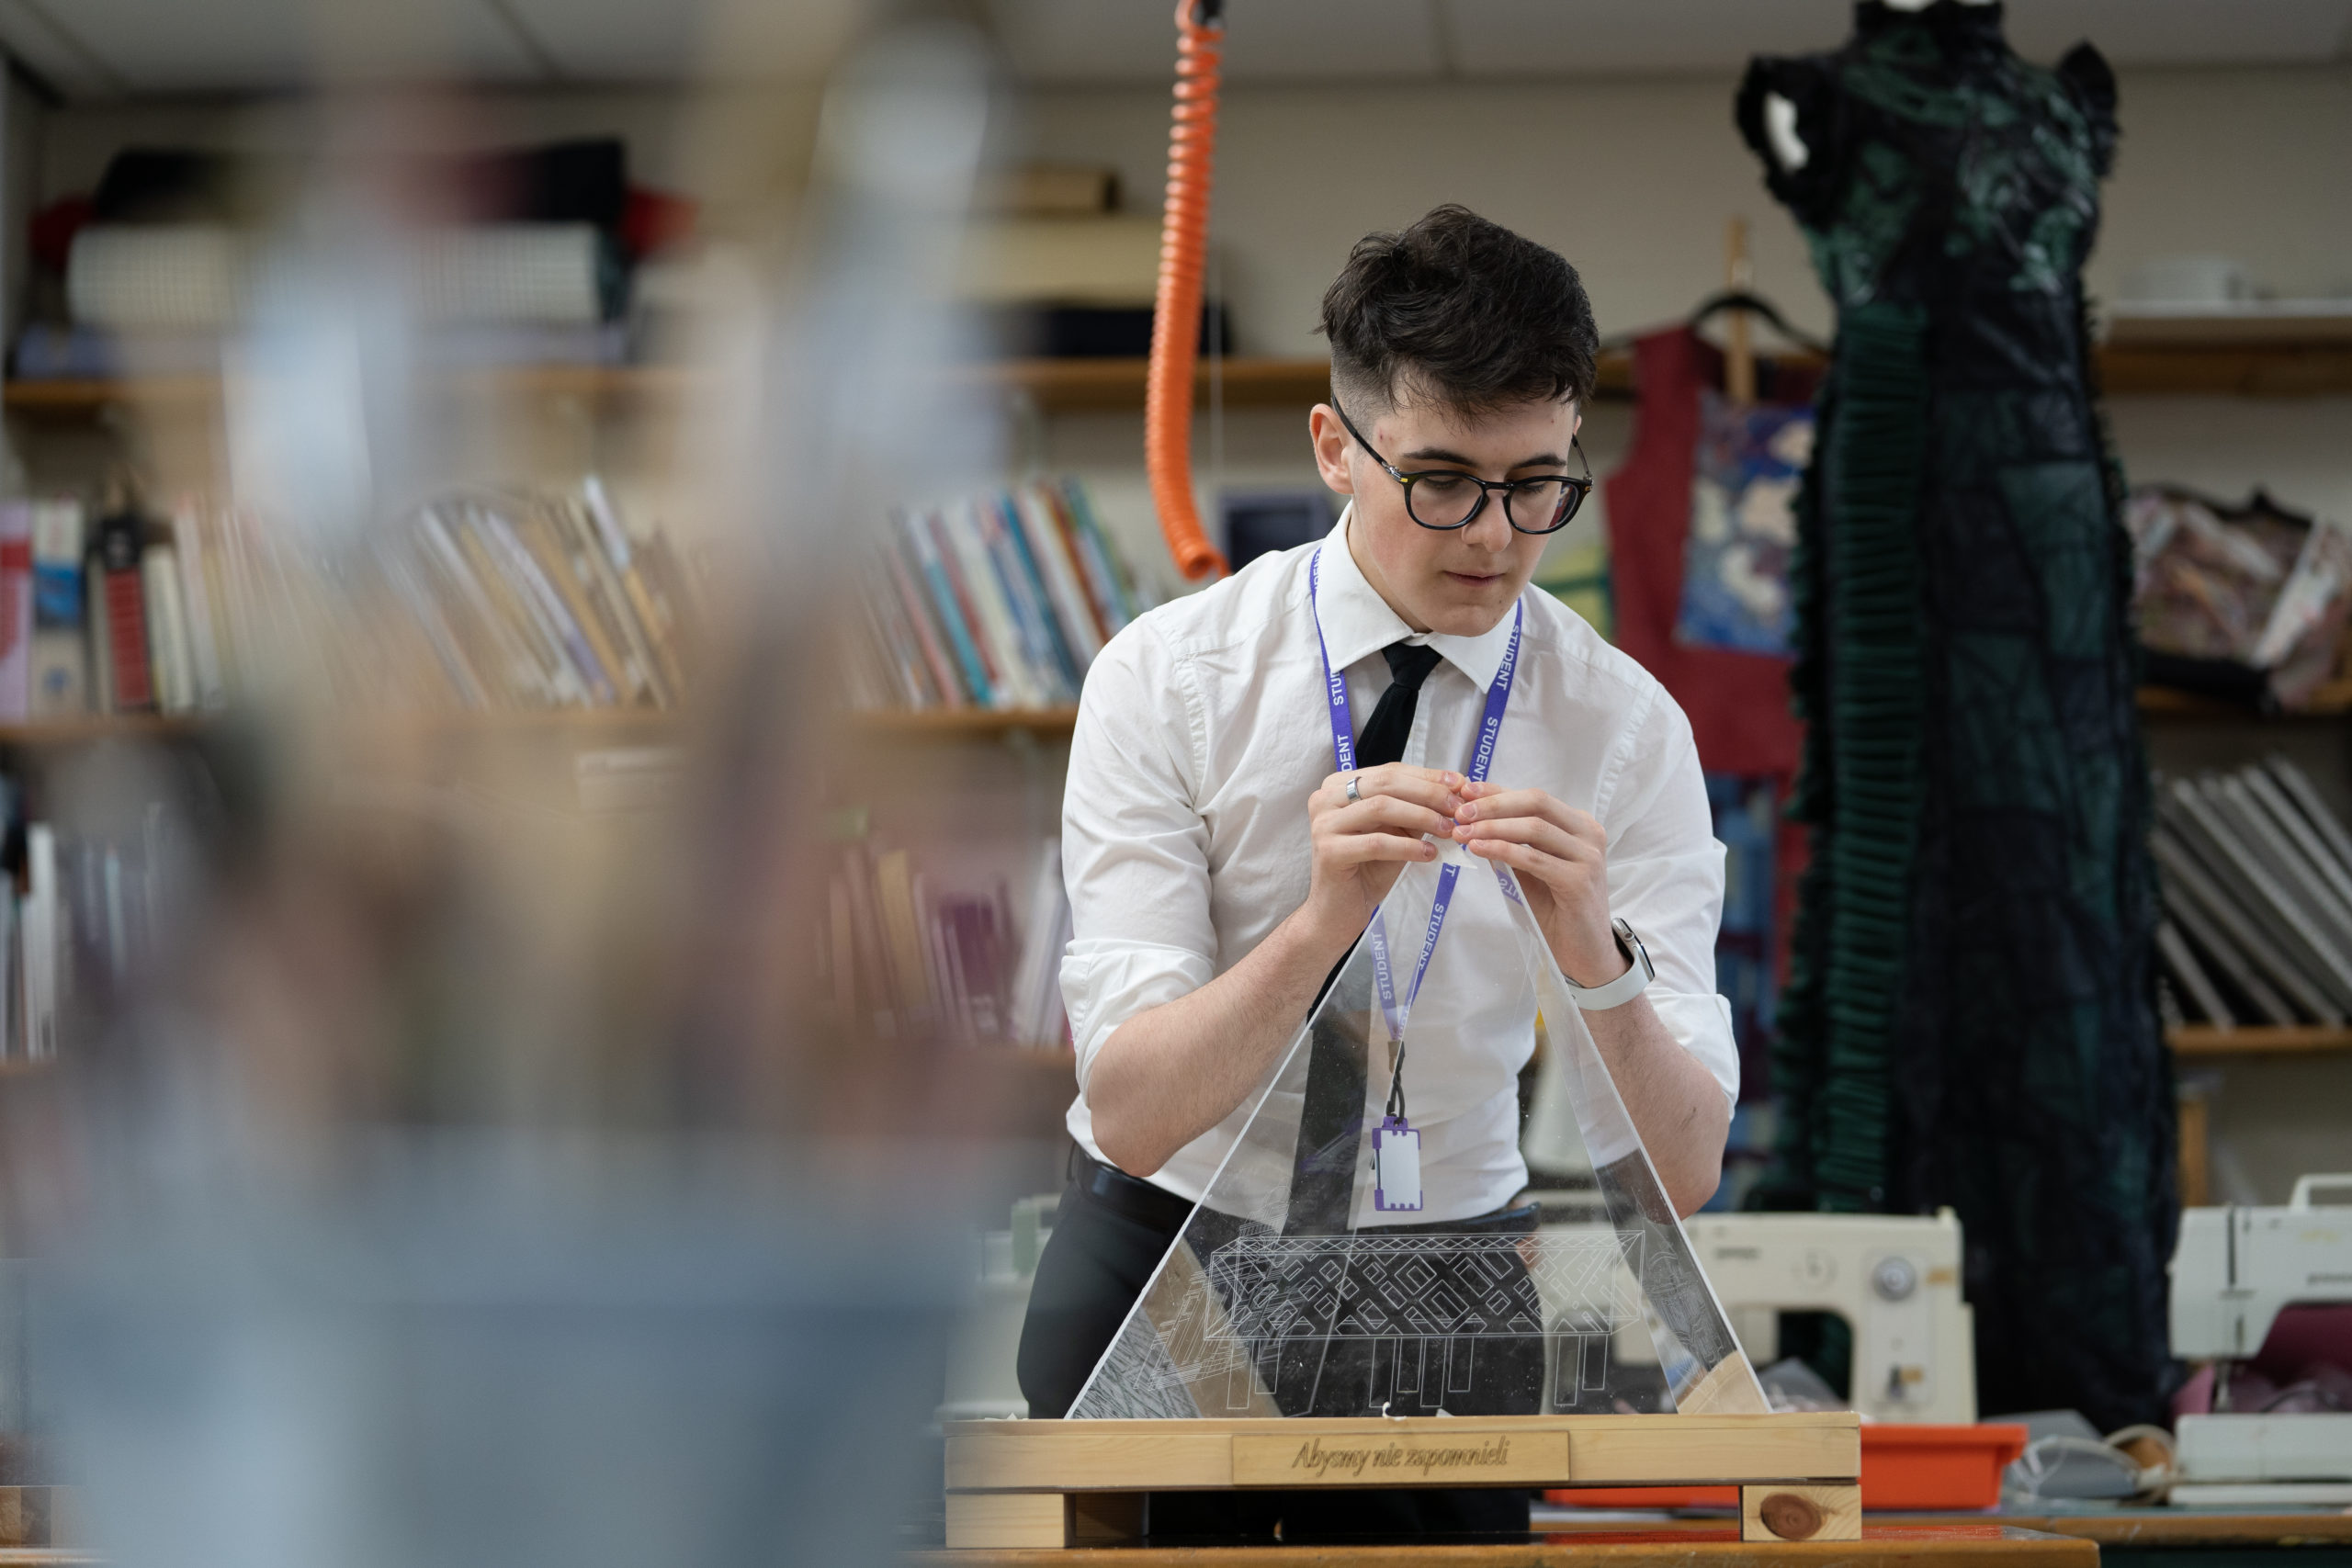 A student can be seen in a Technology class working with materials to create a wood and glass sculpture.